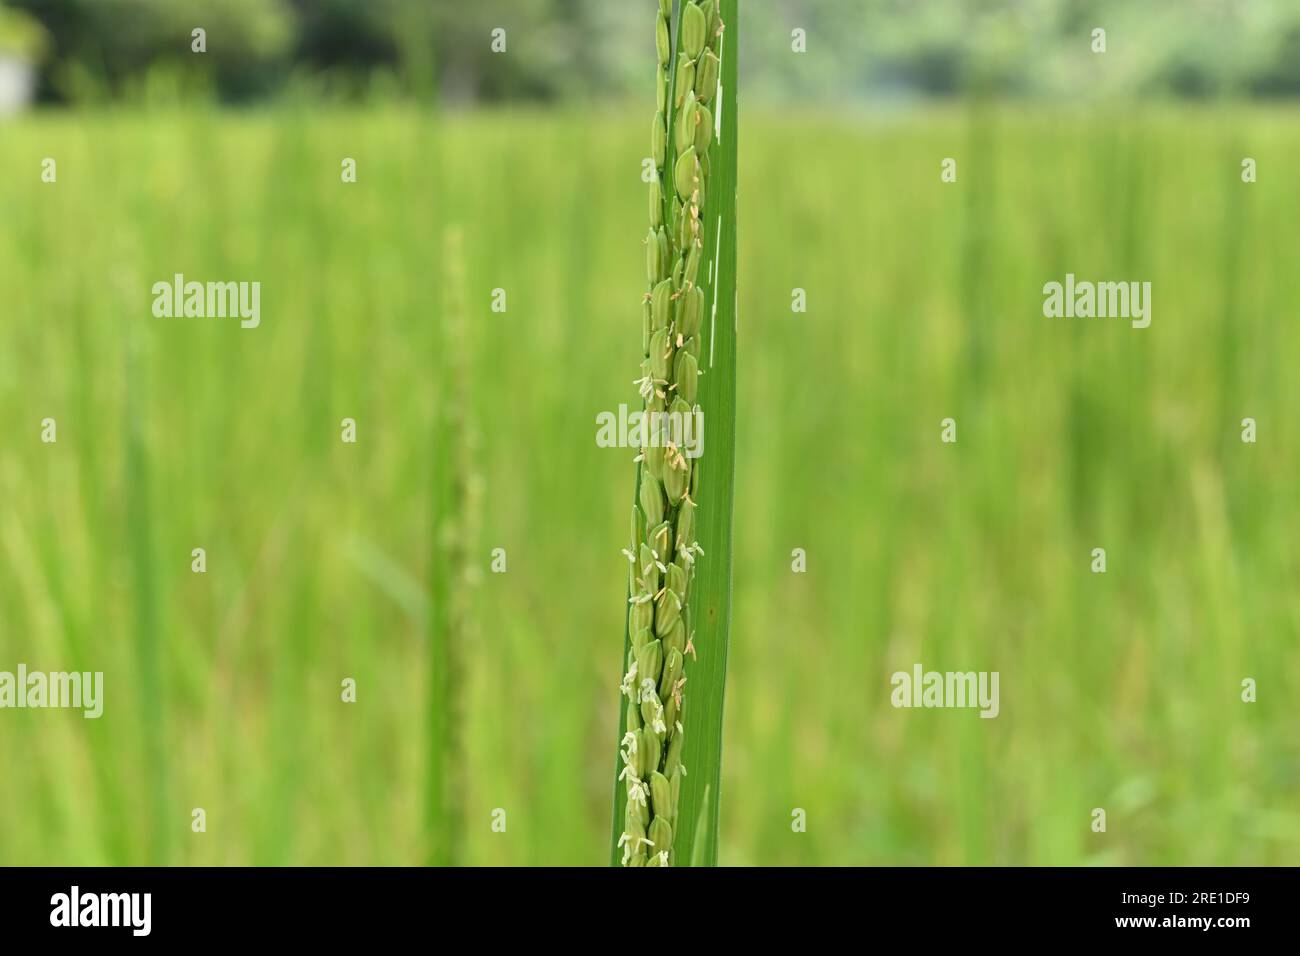 A close up view of the blooming rice flowers on a young rice spike in bloom Stock Photo